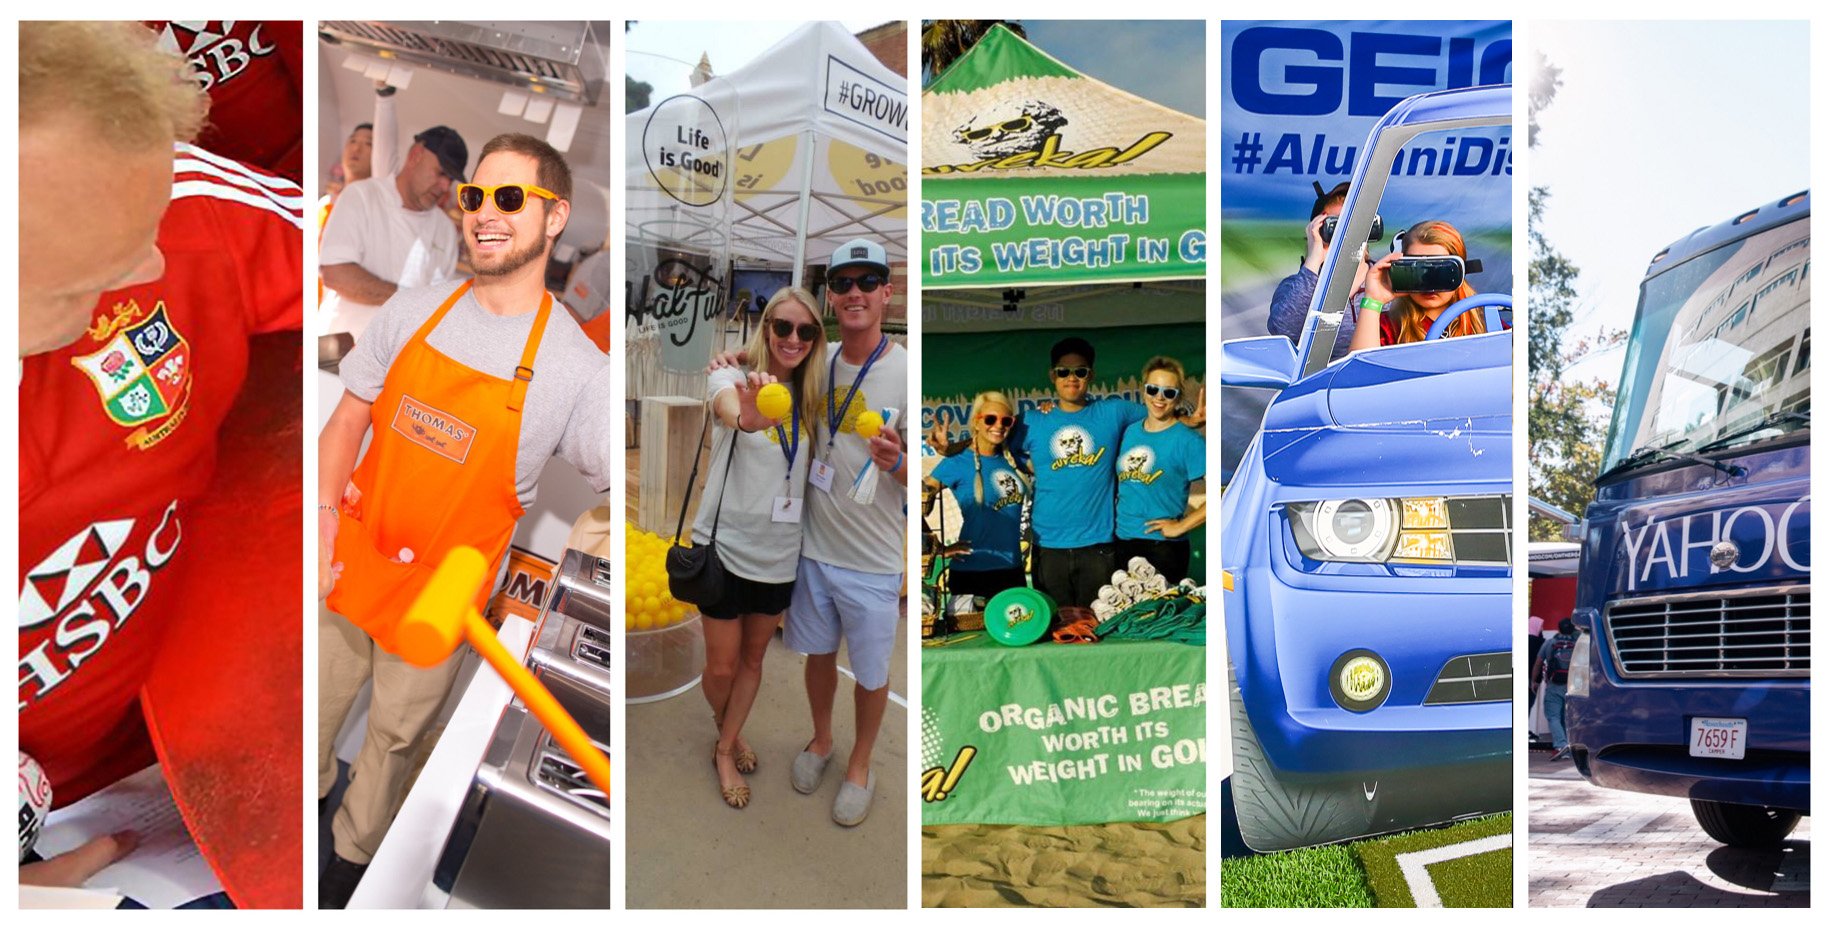 A four-way split picture. The far left is a man in a bright orange apron and matching orange sunglasses. The middle is filled with yellow, with a yellow umbrella and two people holding up lemons. The third picture shows a booth at a fair or convention, all in green. The final slice of the picture is a bright blue car. 